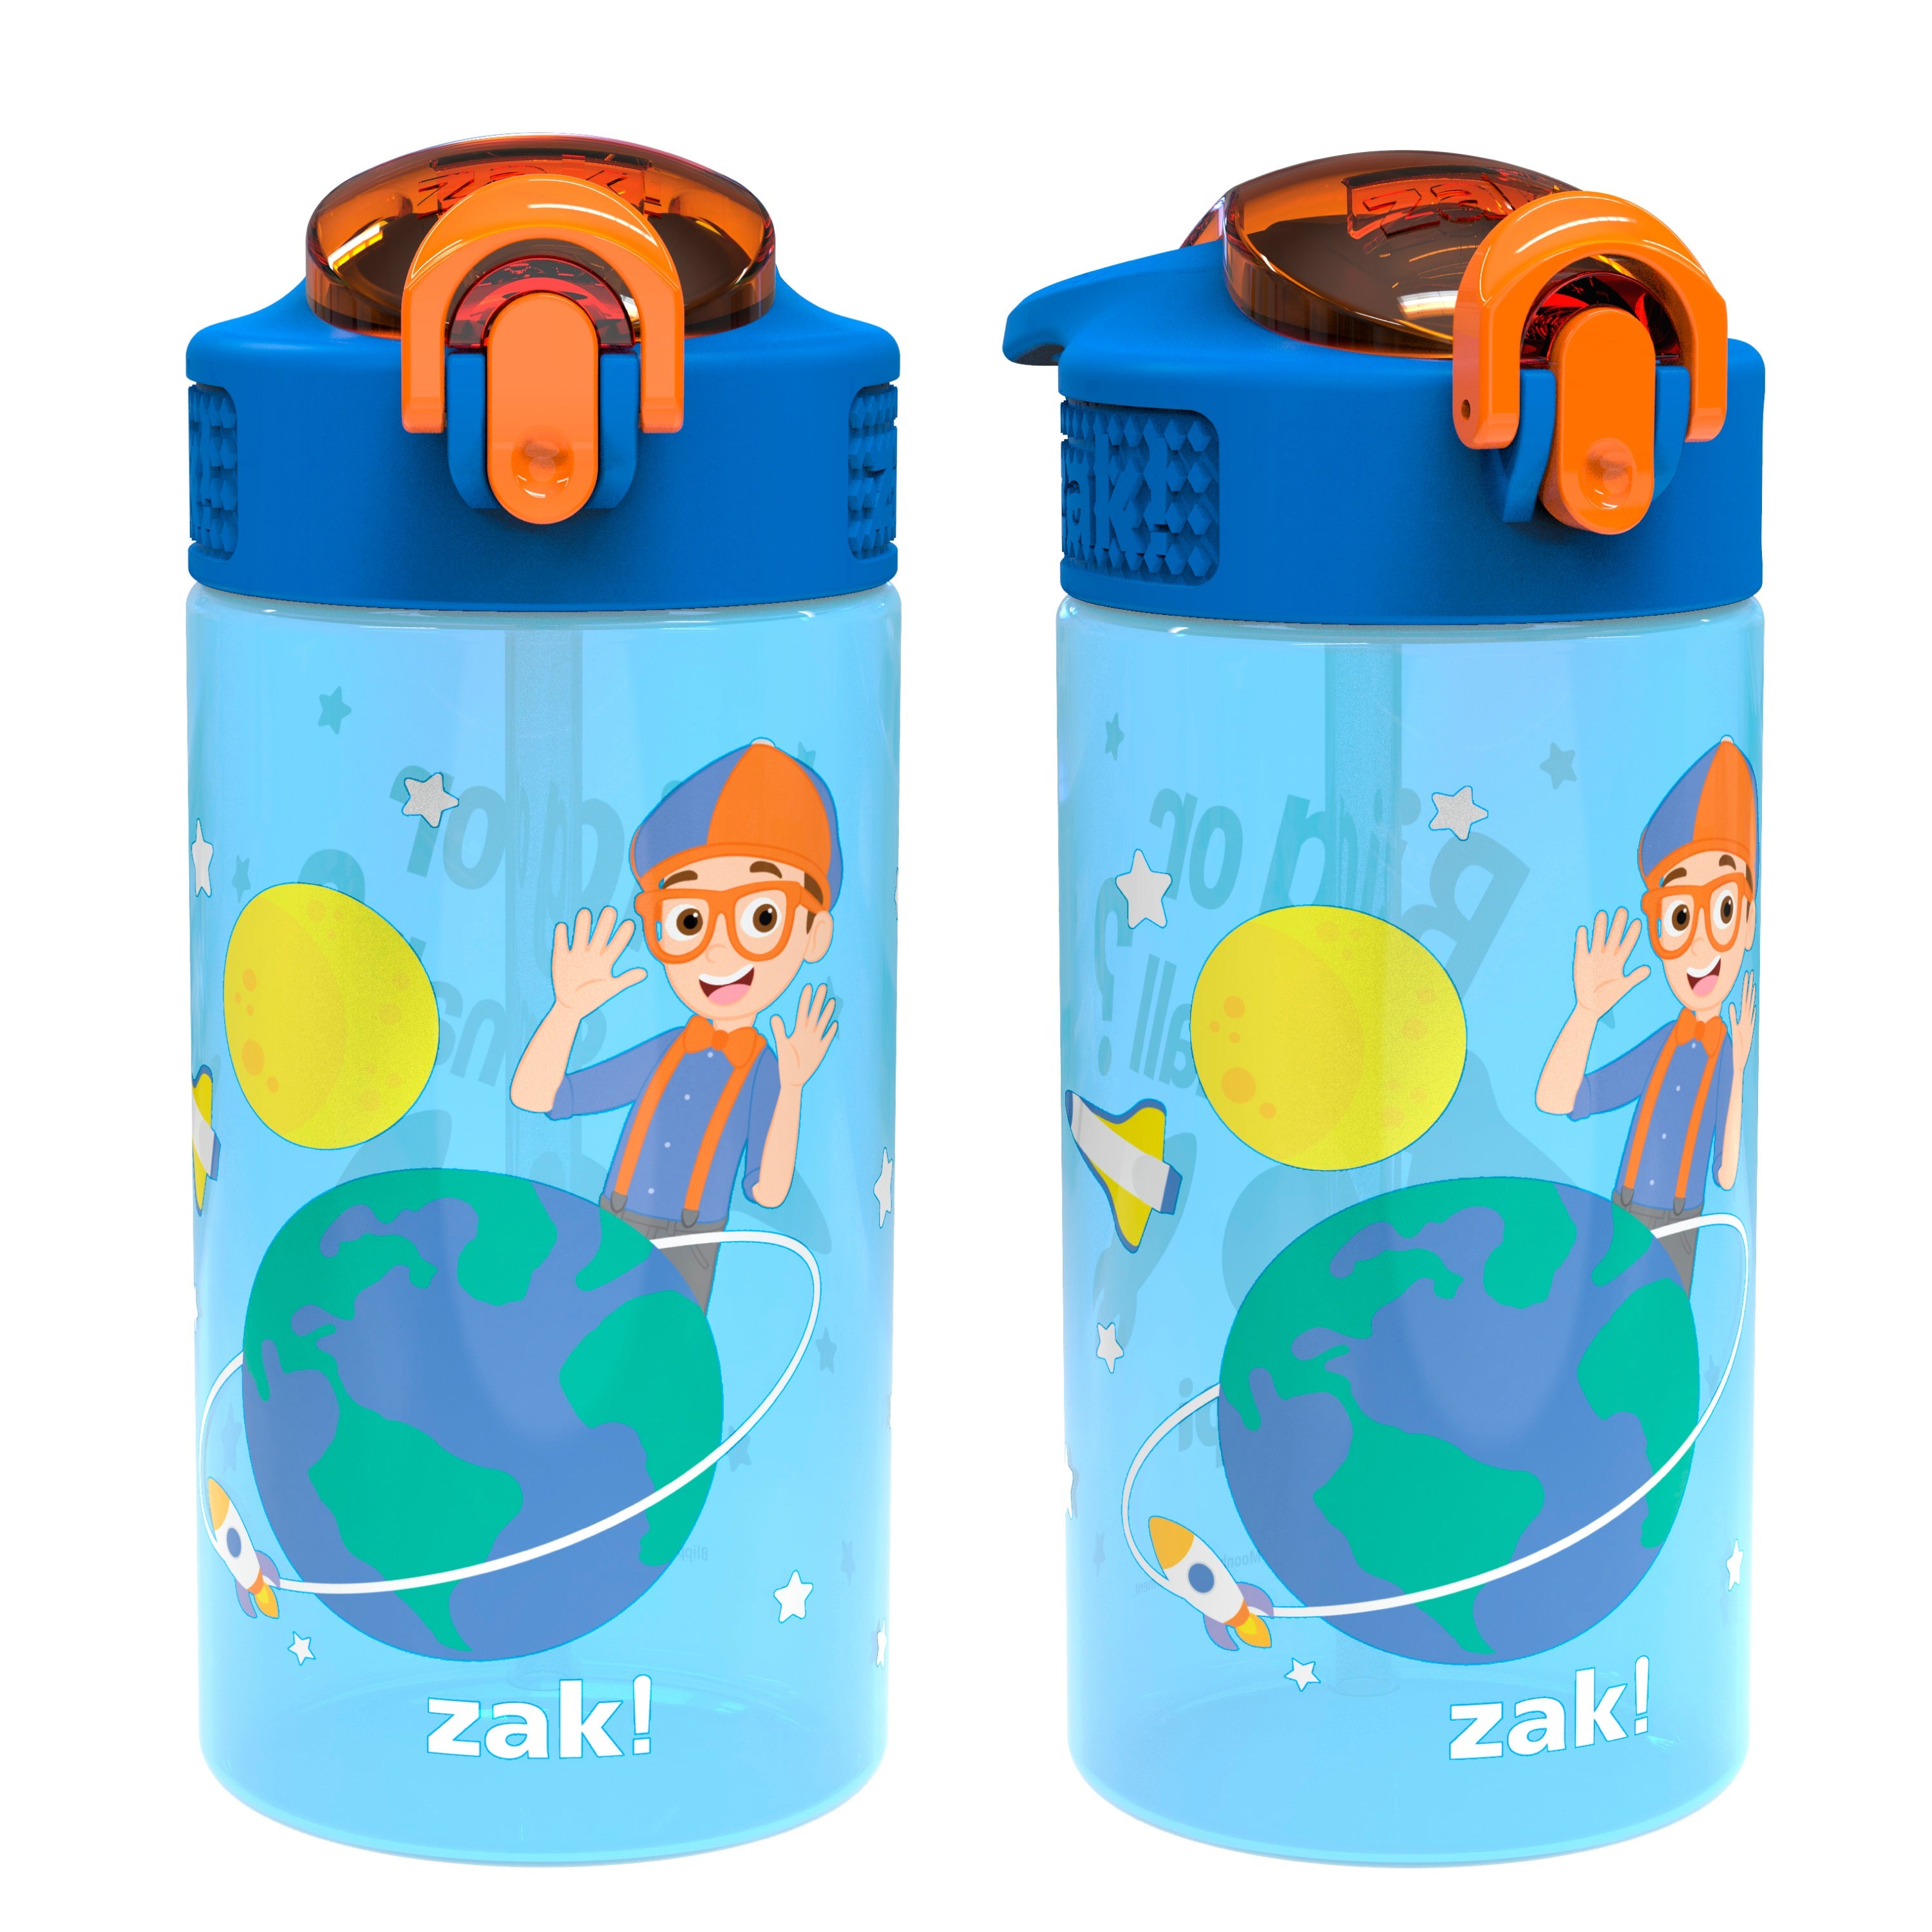 Zak Designs 15.5 oz Kids Water Bottle Stainless Steel with Push-Button Spout and Locking Cover, Paw Patrol Skye, Silver